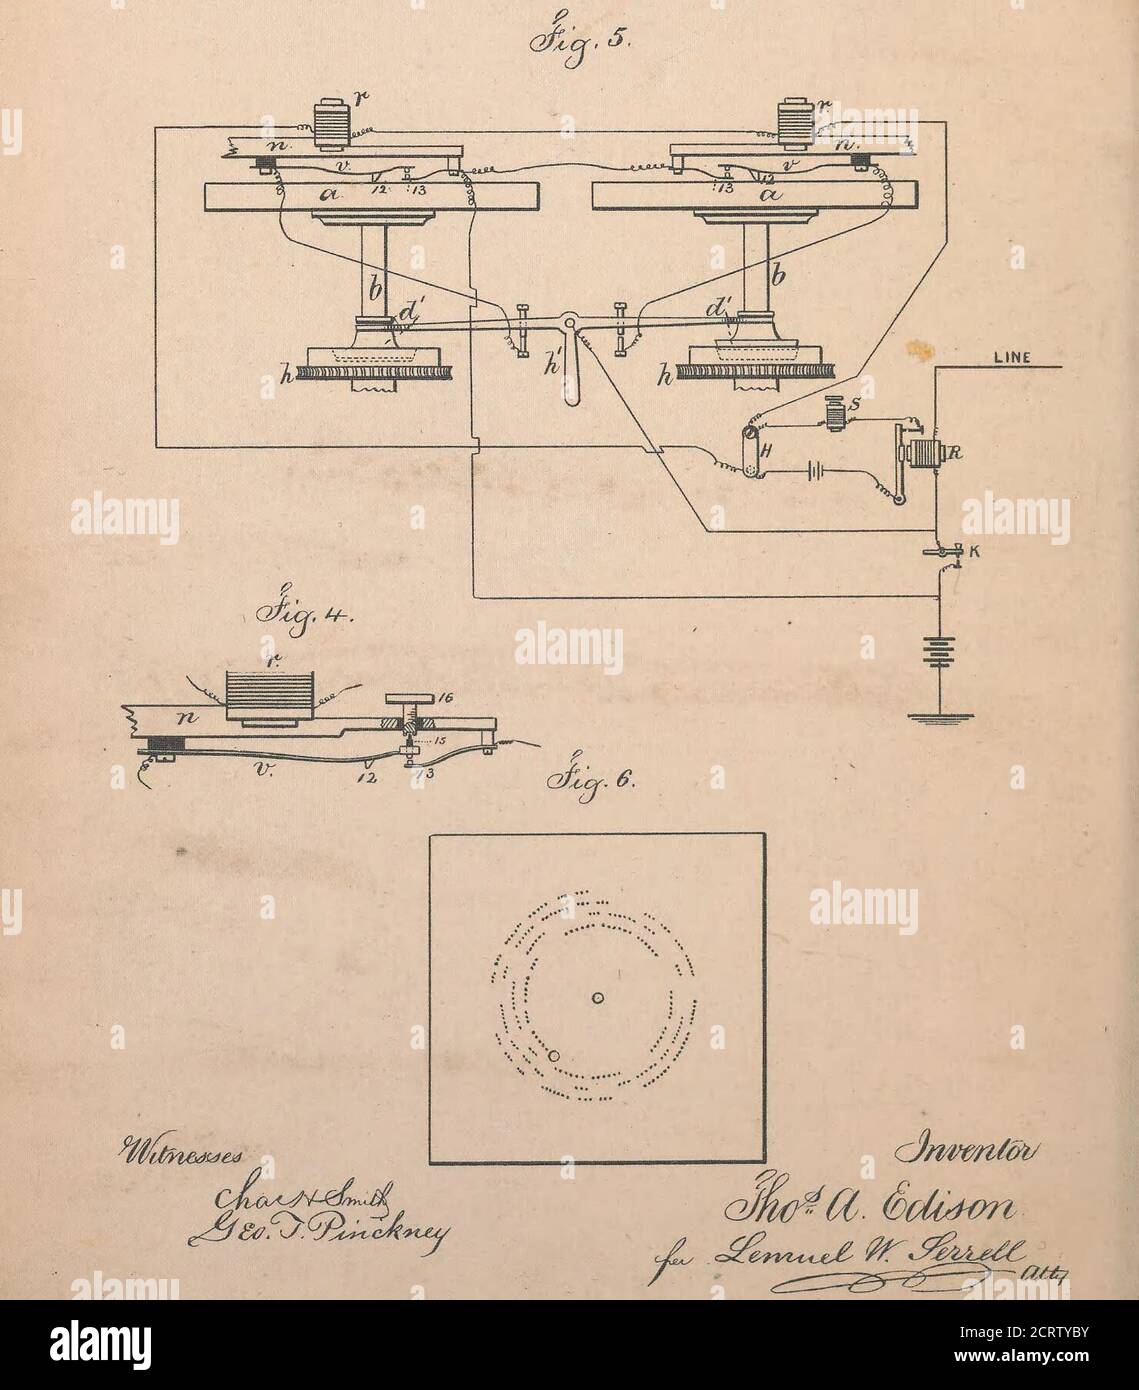 . Collection of United States patents granted to Thomas A. Edison, 1869-1884 . N PETERS. Photo-Lithographer. Washington, D. C 2 Sheets—Sheet 2. T, A. EDISON.Automatic-Telegraph. No. 213,554. Patented Mar. 25, 1879.. N. PtTERS. Photo-Lithographer. Washington. D. C. United States Patent Office THOMAS A. EDISON, OF MENLO PARK, NEW JERSEY.IMPROVEMENT IN AUTOMATIC TELEGRAPHS. Specification forming part of Letters Patent No. 213,554, dated March 85, 187.9 ; application filed March 26, 1877. To all whom it may concern: Be it known that I, Thomas A. Edison, ofMenlo Park, in the county of Middlesex and Stock Photo